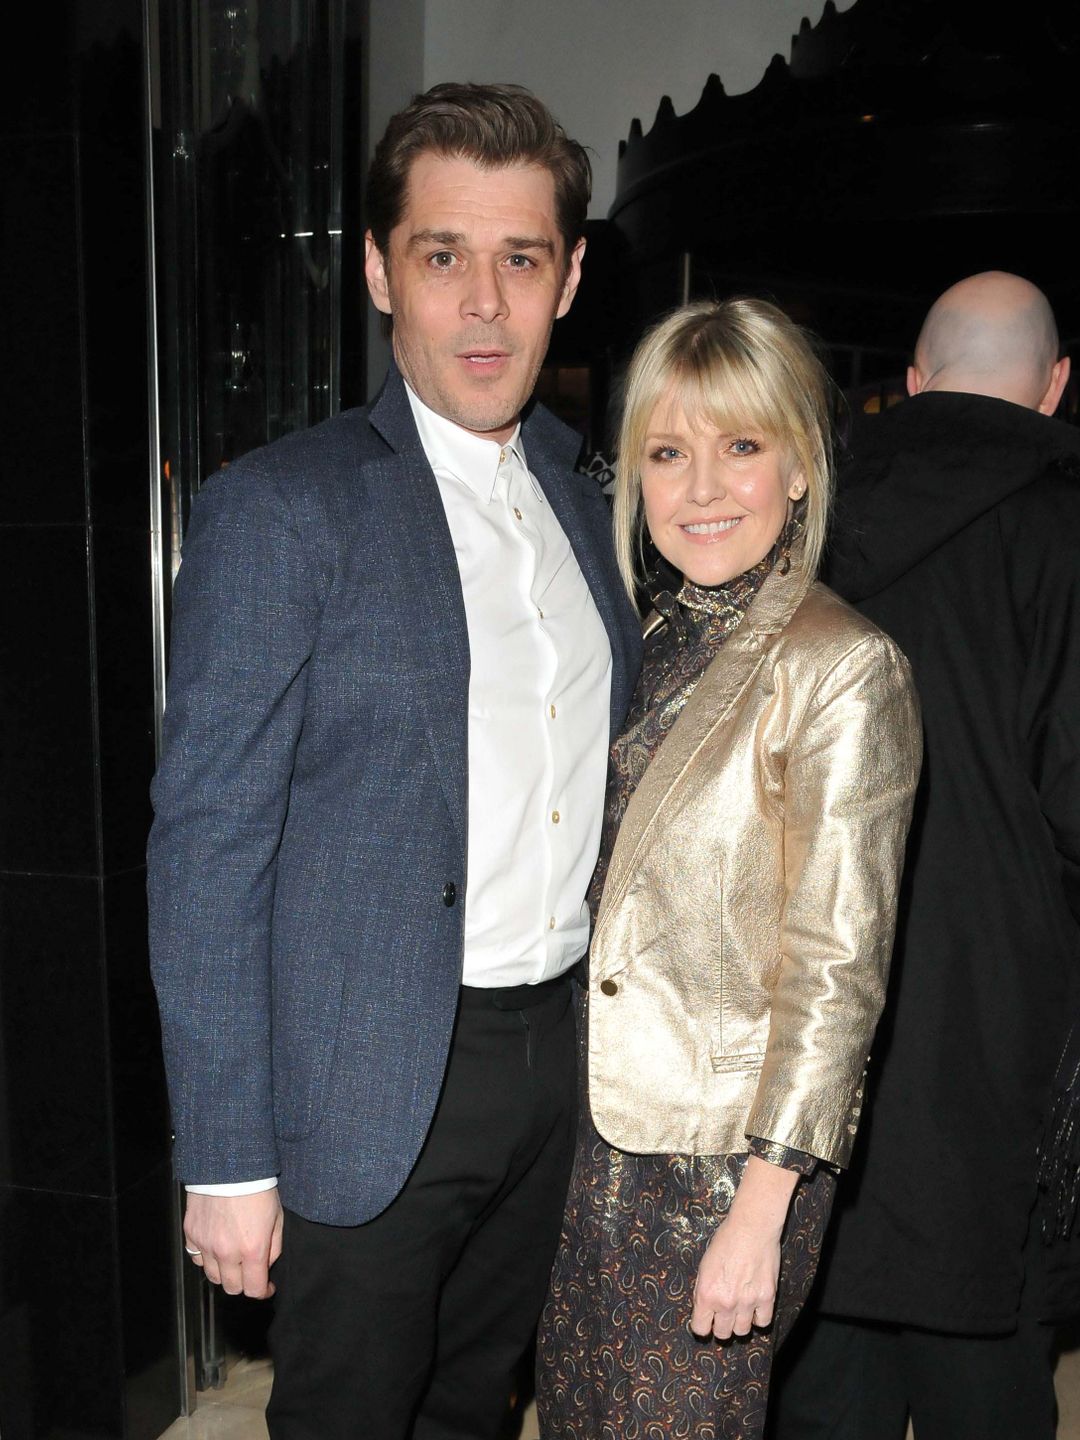 Kenny Doughty and Ashley Jensen at
The Radio Times Covers Party at Claridge's Hotel